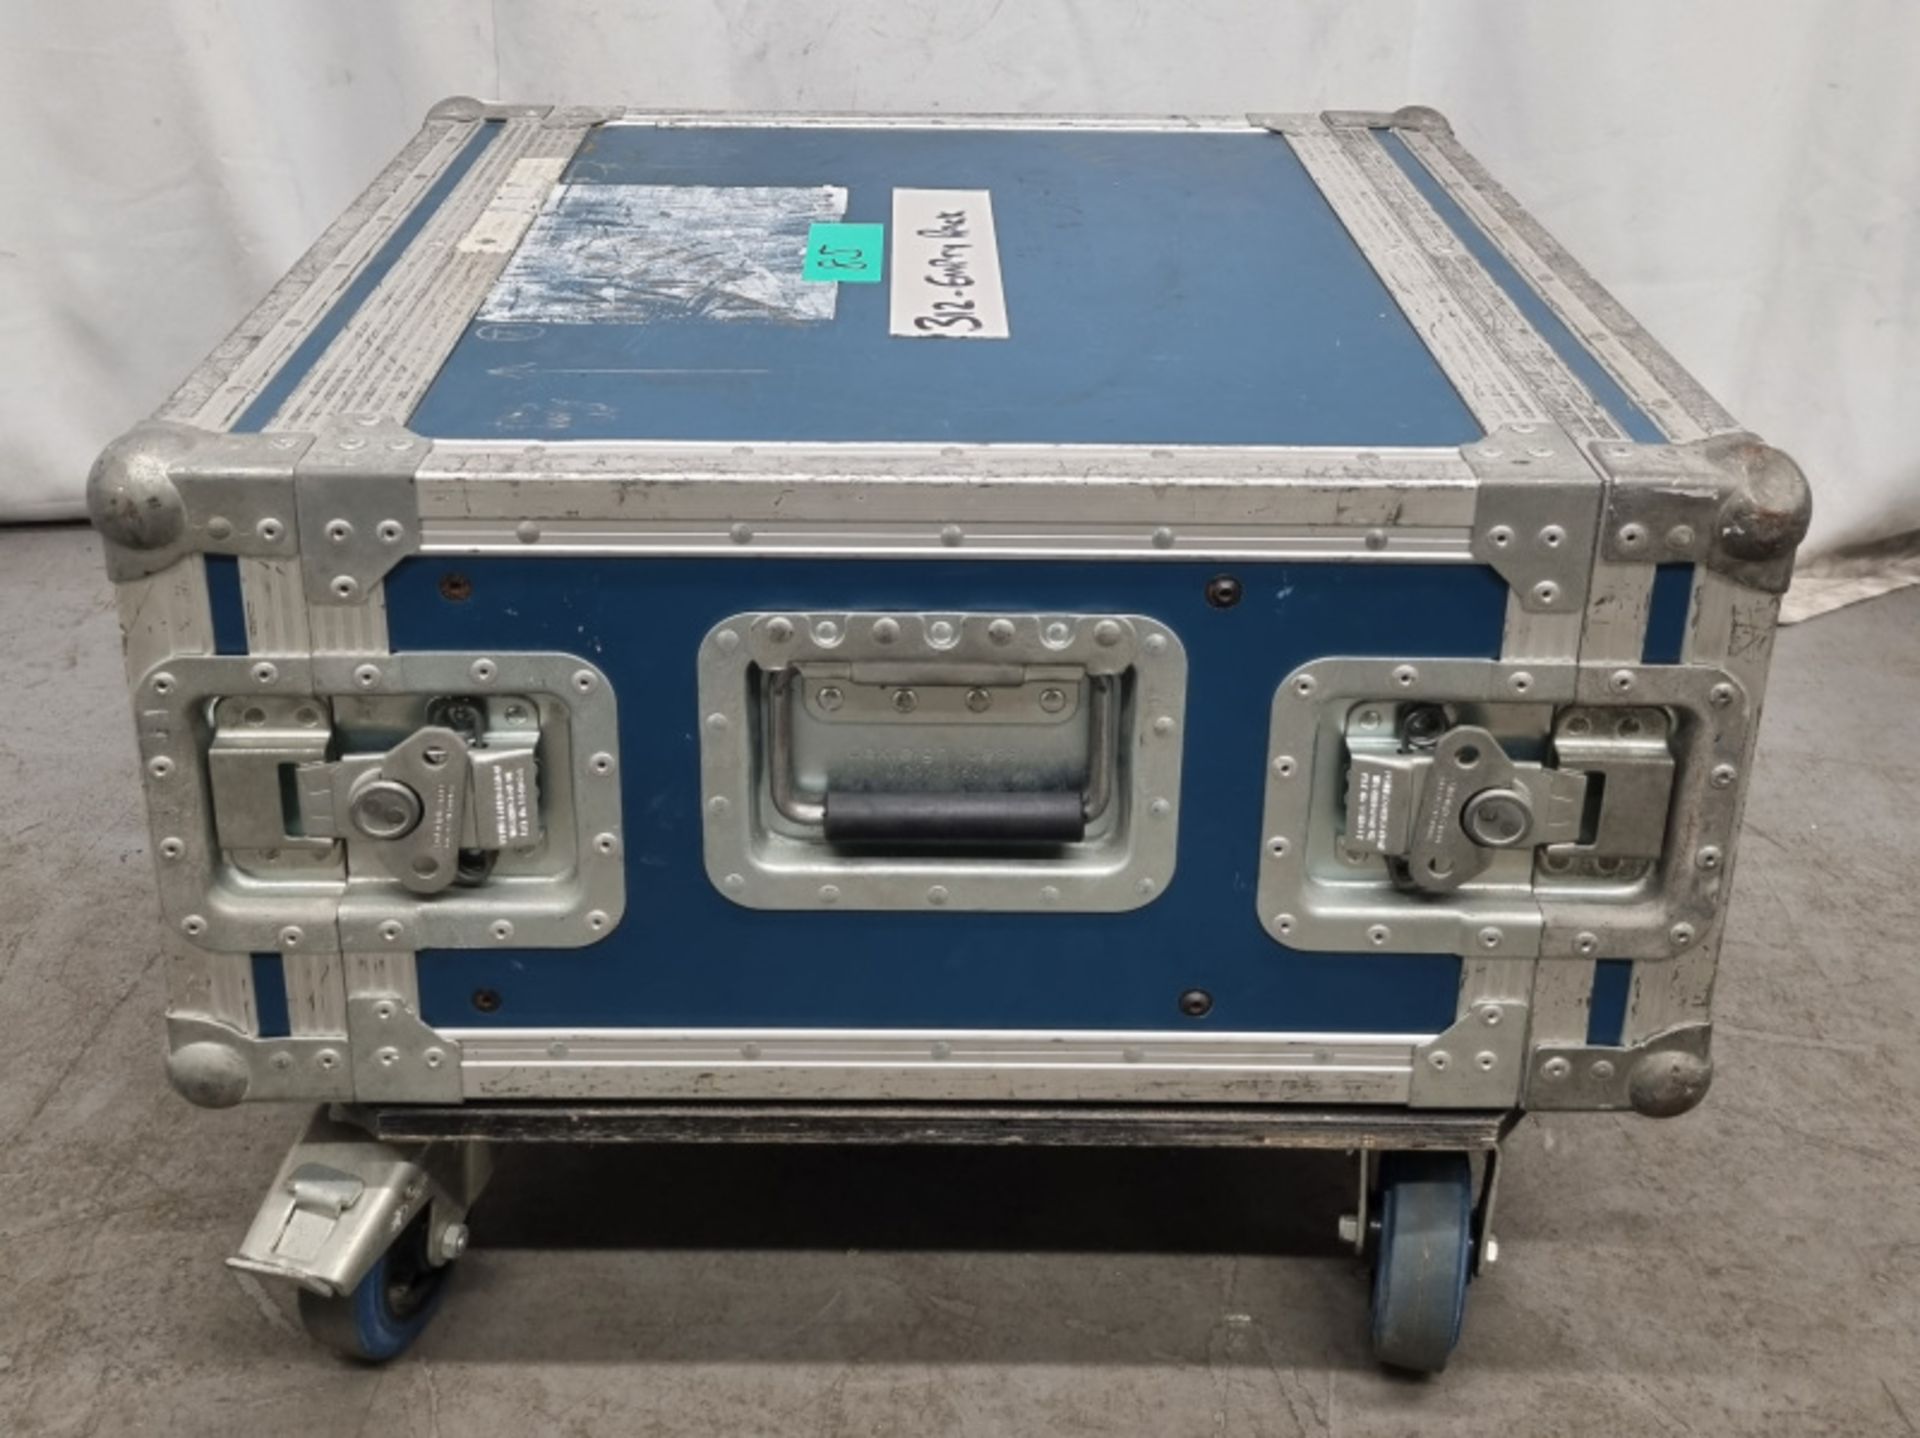 Empty Wheeled Flight case with internal rack - Dimensions L53.5 x W60 x H43cm (including wheels) - Image 3 of 5